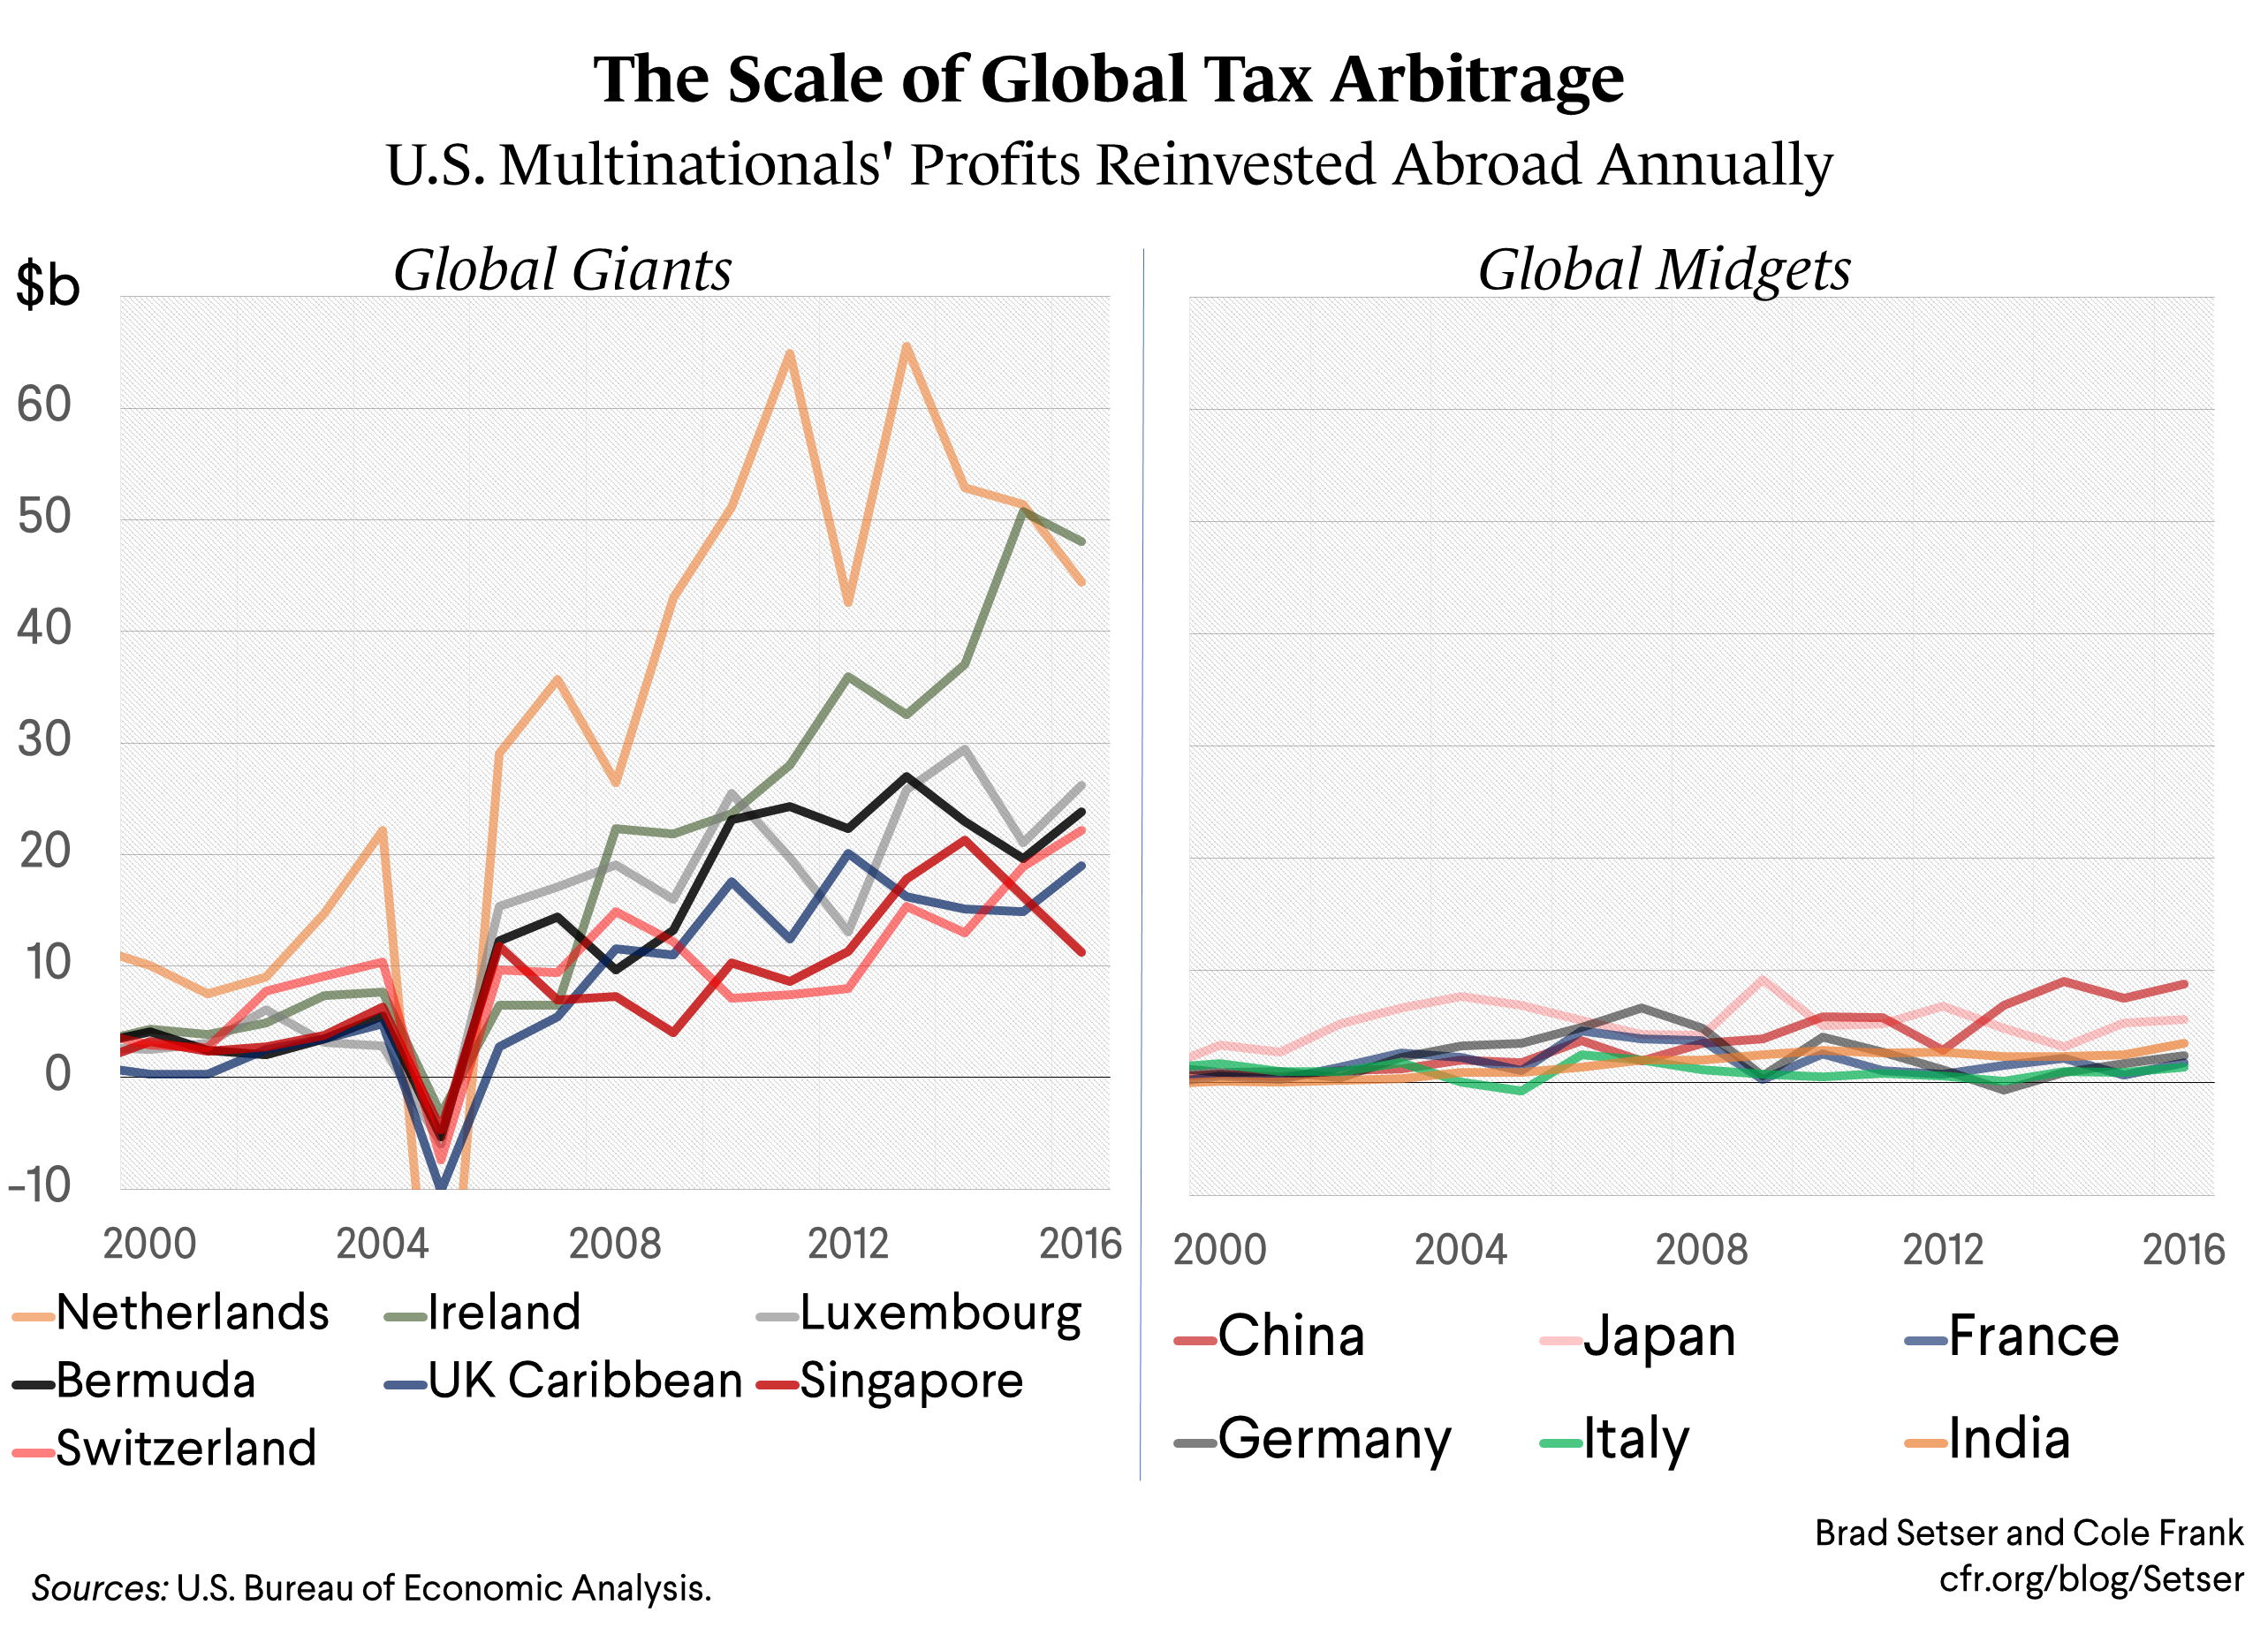 The Impact of Tax Arbitrage on the U.S. Balance of Payments